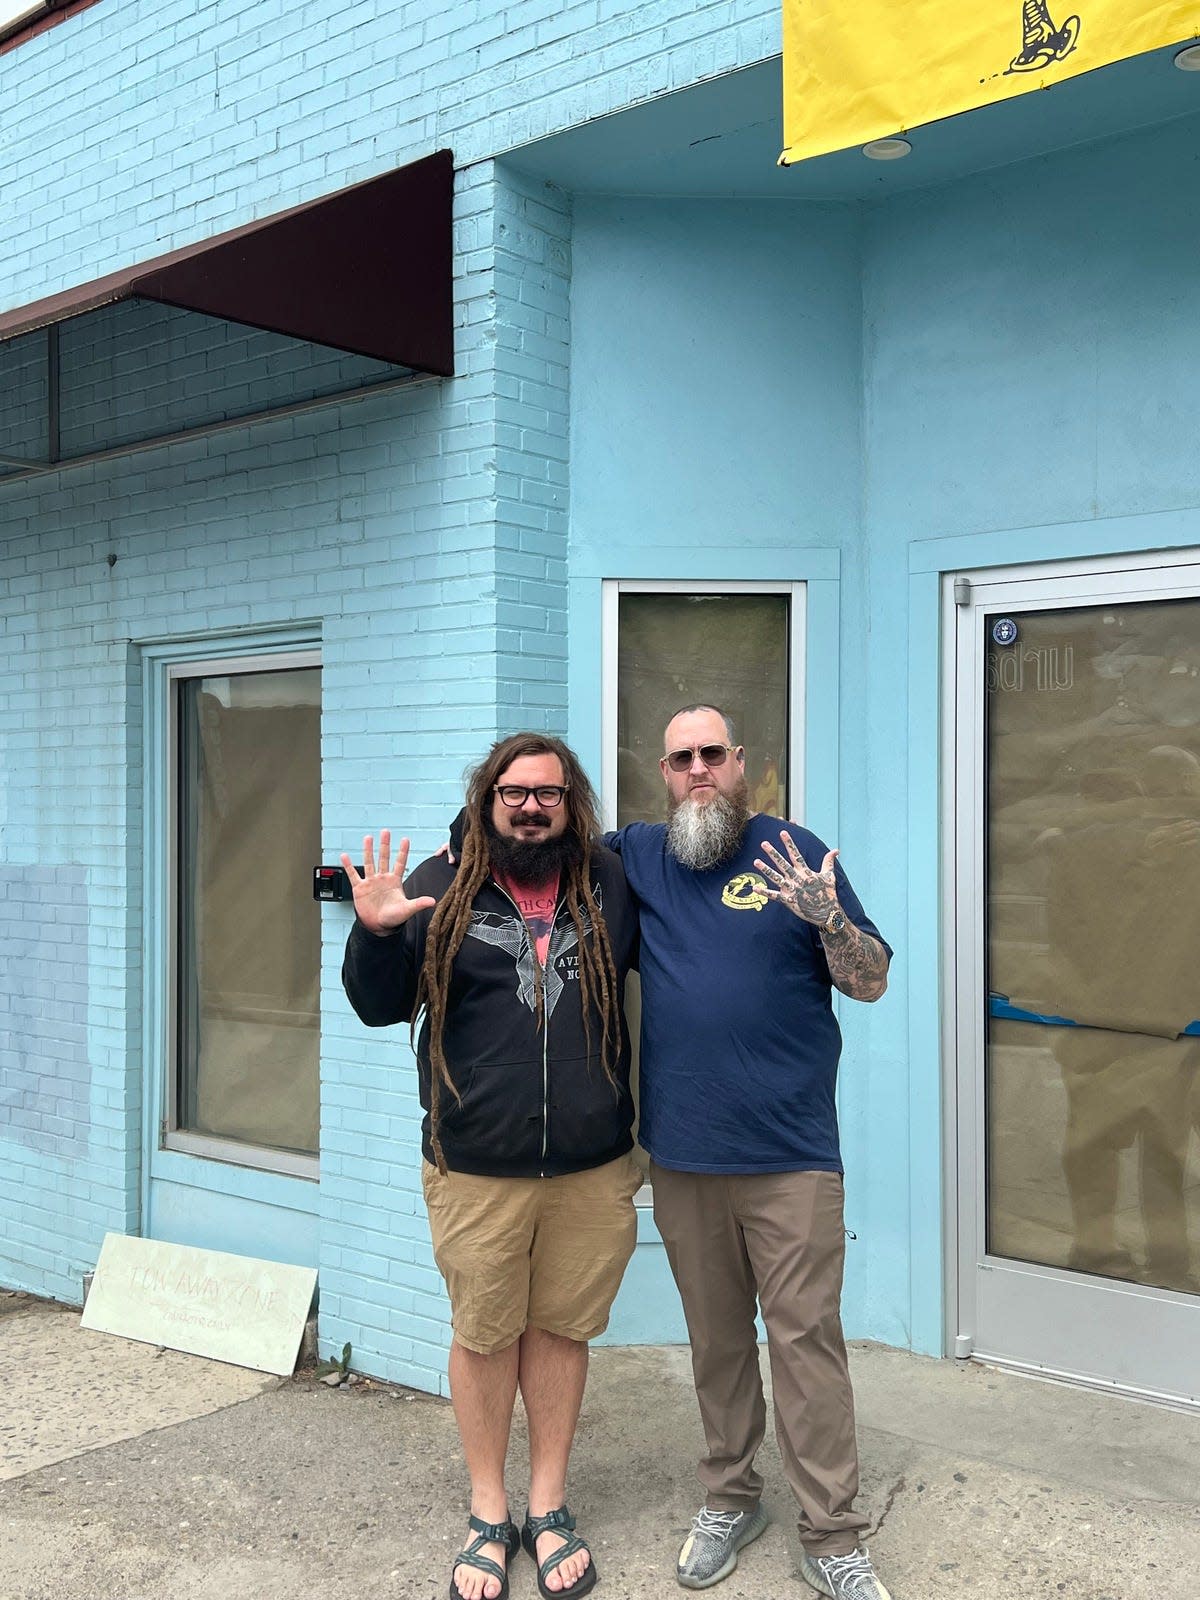 Jesse Van Note and Andrew Ross, owners of The Whale, outside their soon-to-open South Slope location.